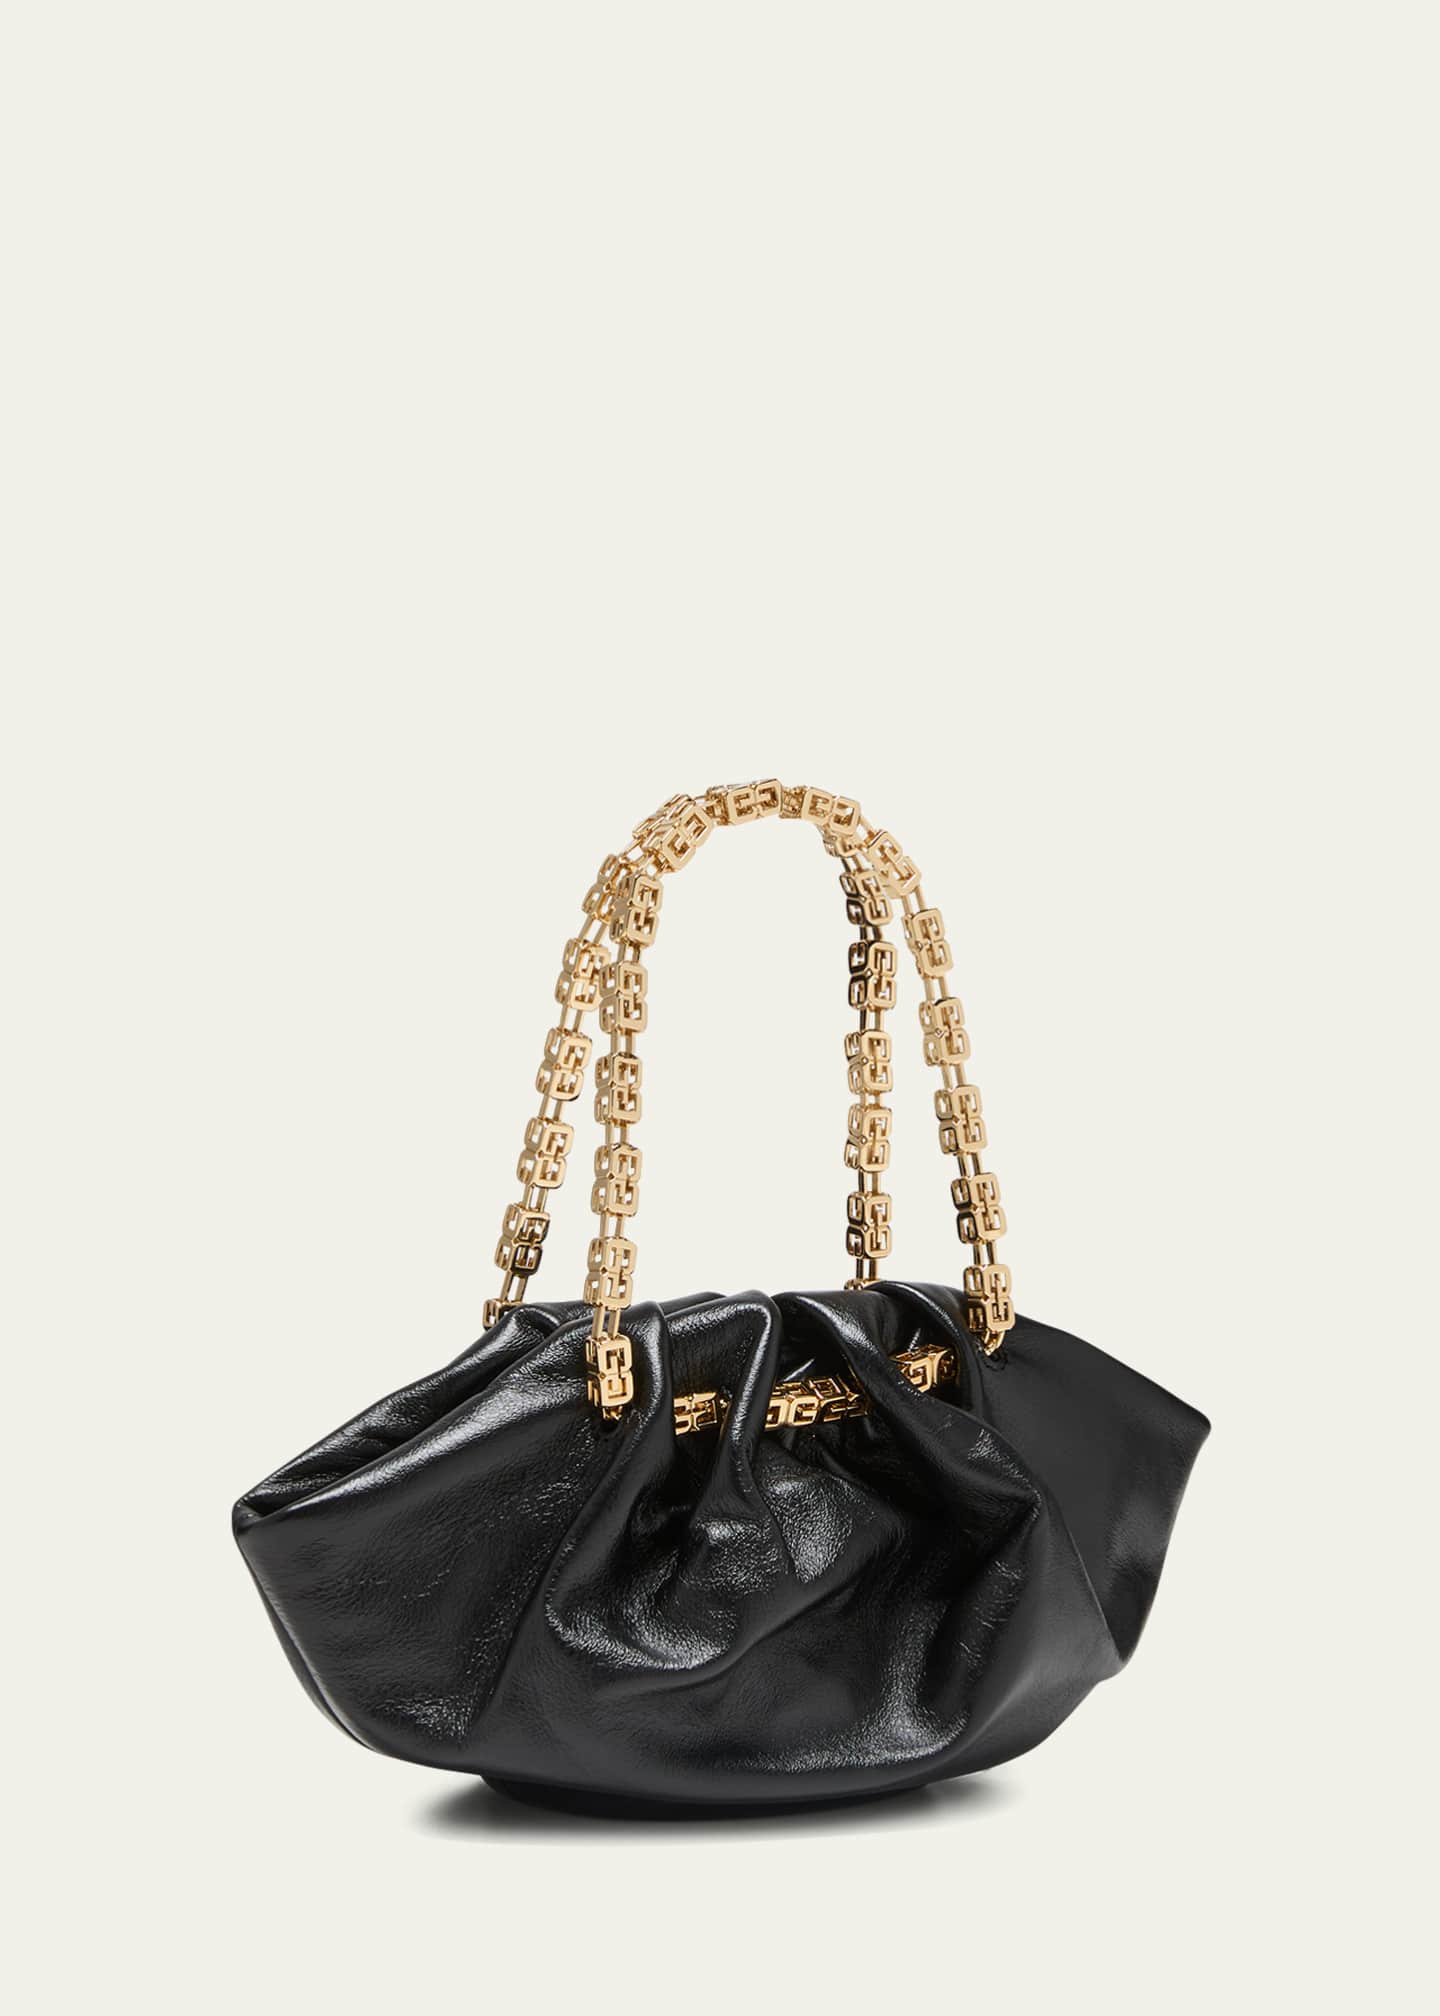 Givenchy Mini Kenny Neo Shoulder Bag in Leather - Bergdorf Goodman